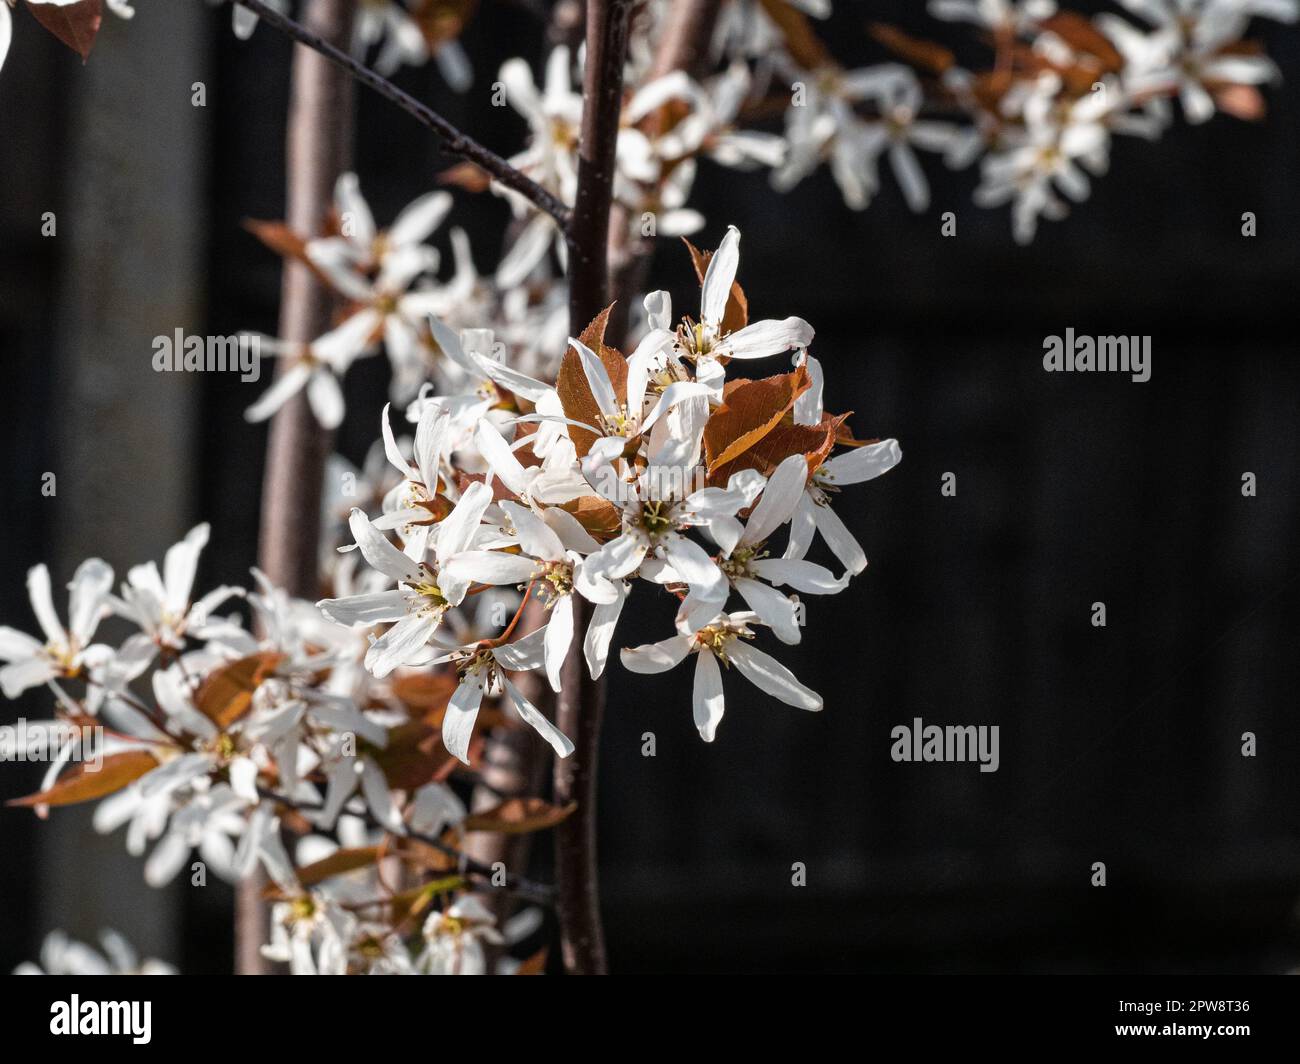 A branch of Amelanchier laevis R.J. Hilton covered in delicate white starry flowers Stock Photo